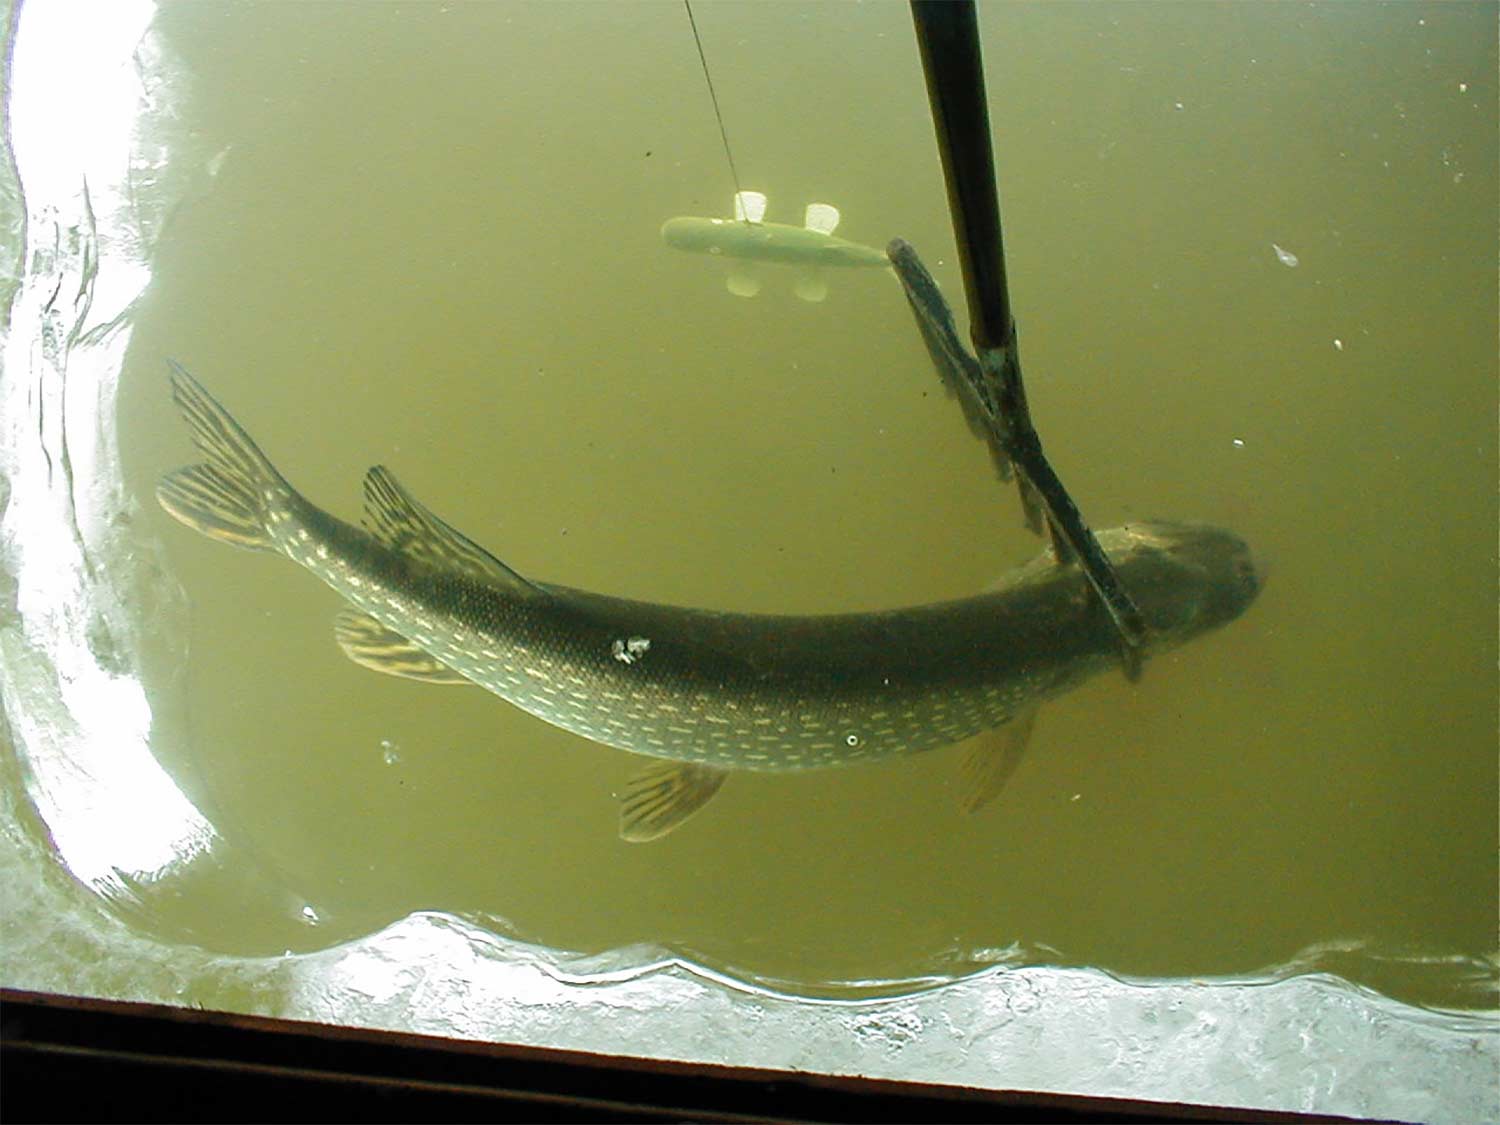 A northern pike about to be speared.